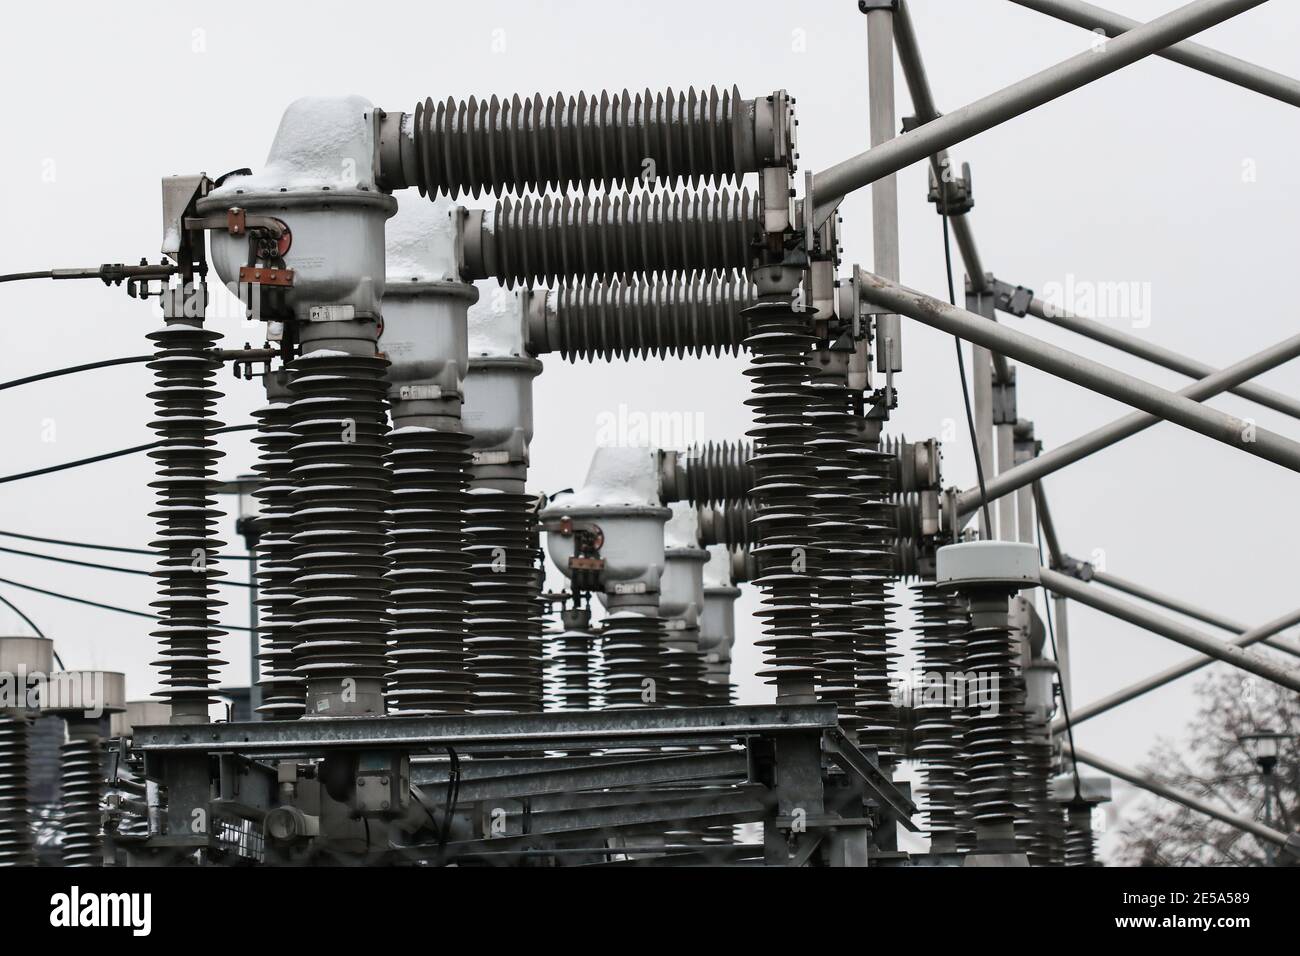 Details of 100 kV transformer power substation located in Poland Stock Photo